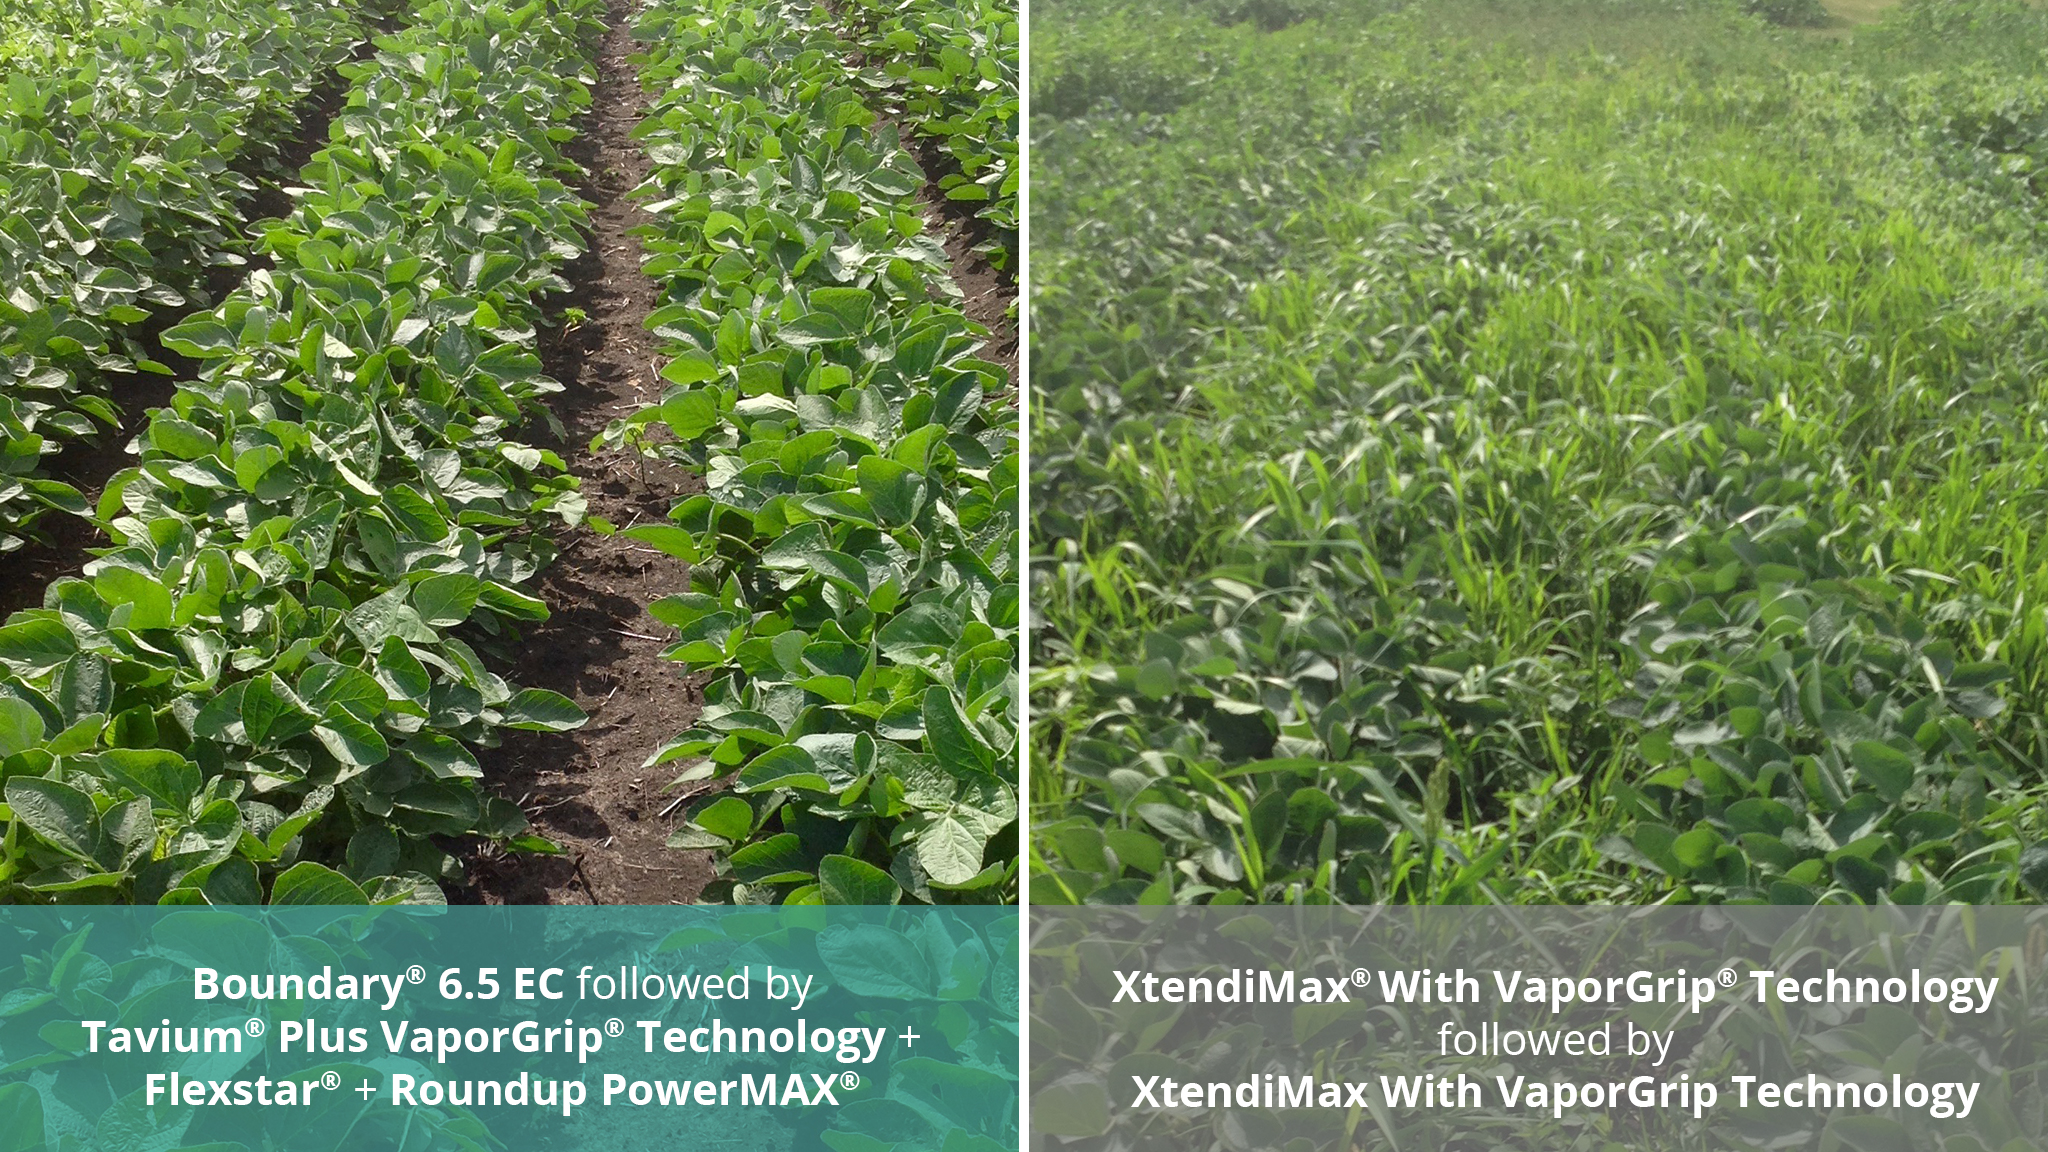 Tavium Plus VaporGrip Technology offers multiple effective sites of action to help you stay ahead of resistant weeds.